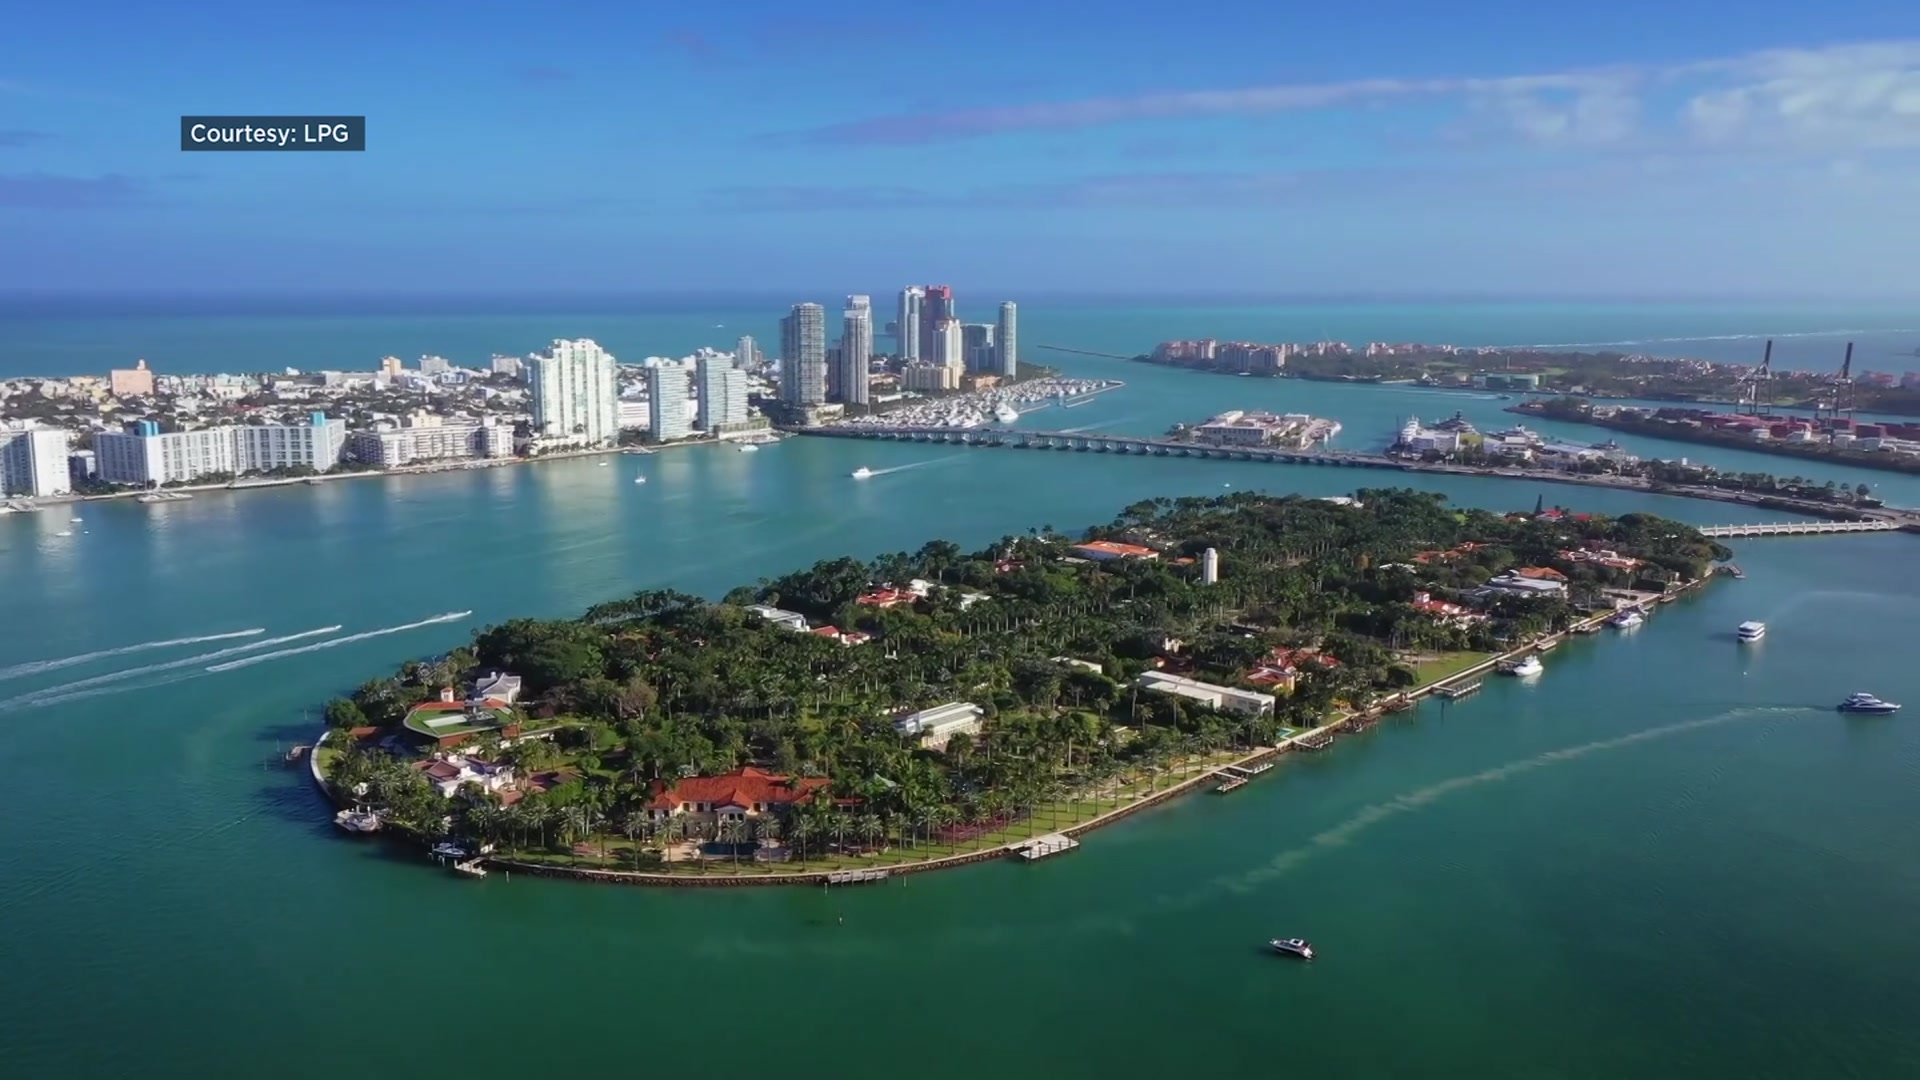 Living Large: Real Estate Boom Continues With M Estate With 2 Homes On Star Island